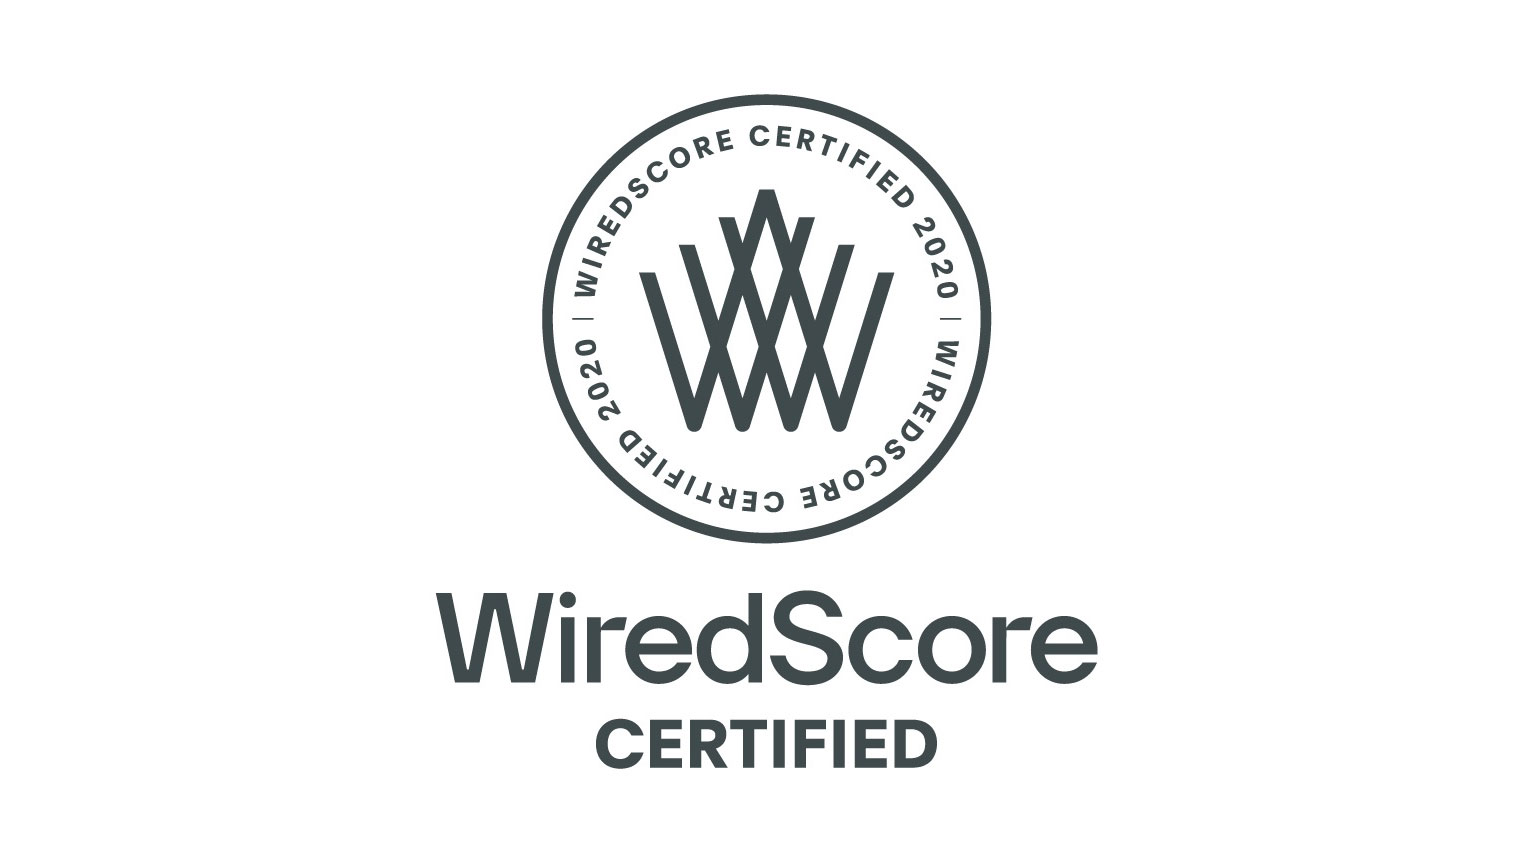 Waterside Apartments achieves a WiredScore Certified rating